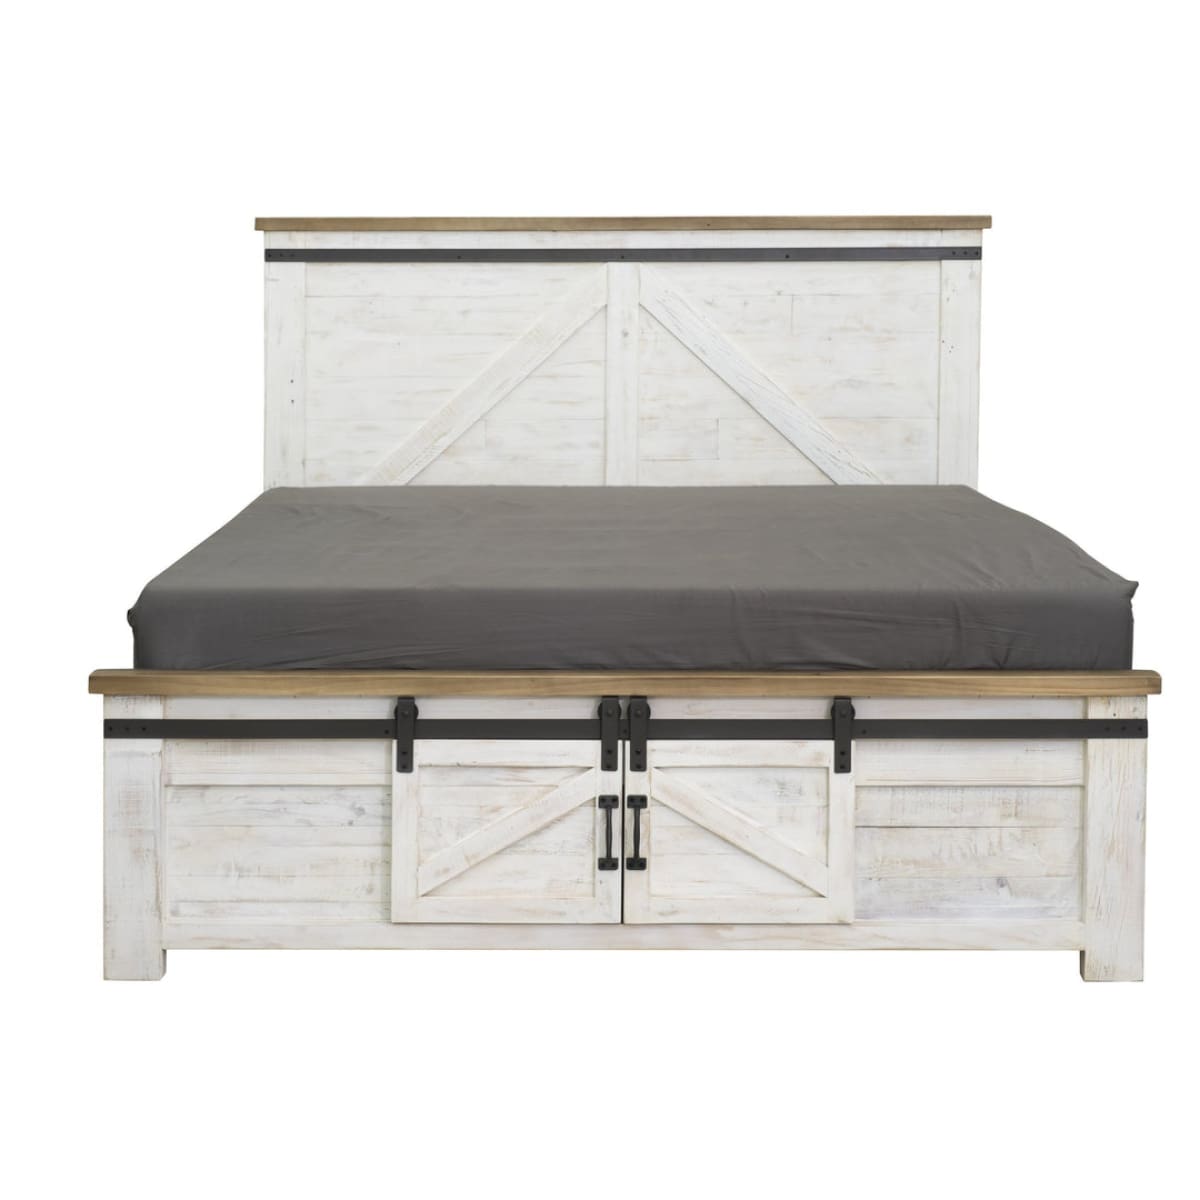 Provence King Bed - lh-import-beds